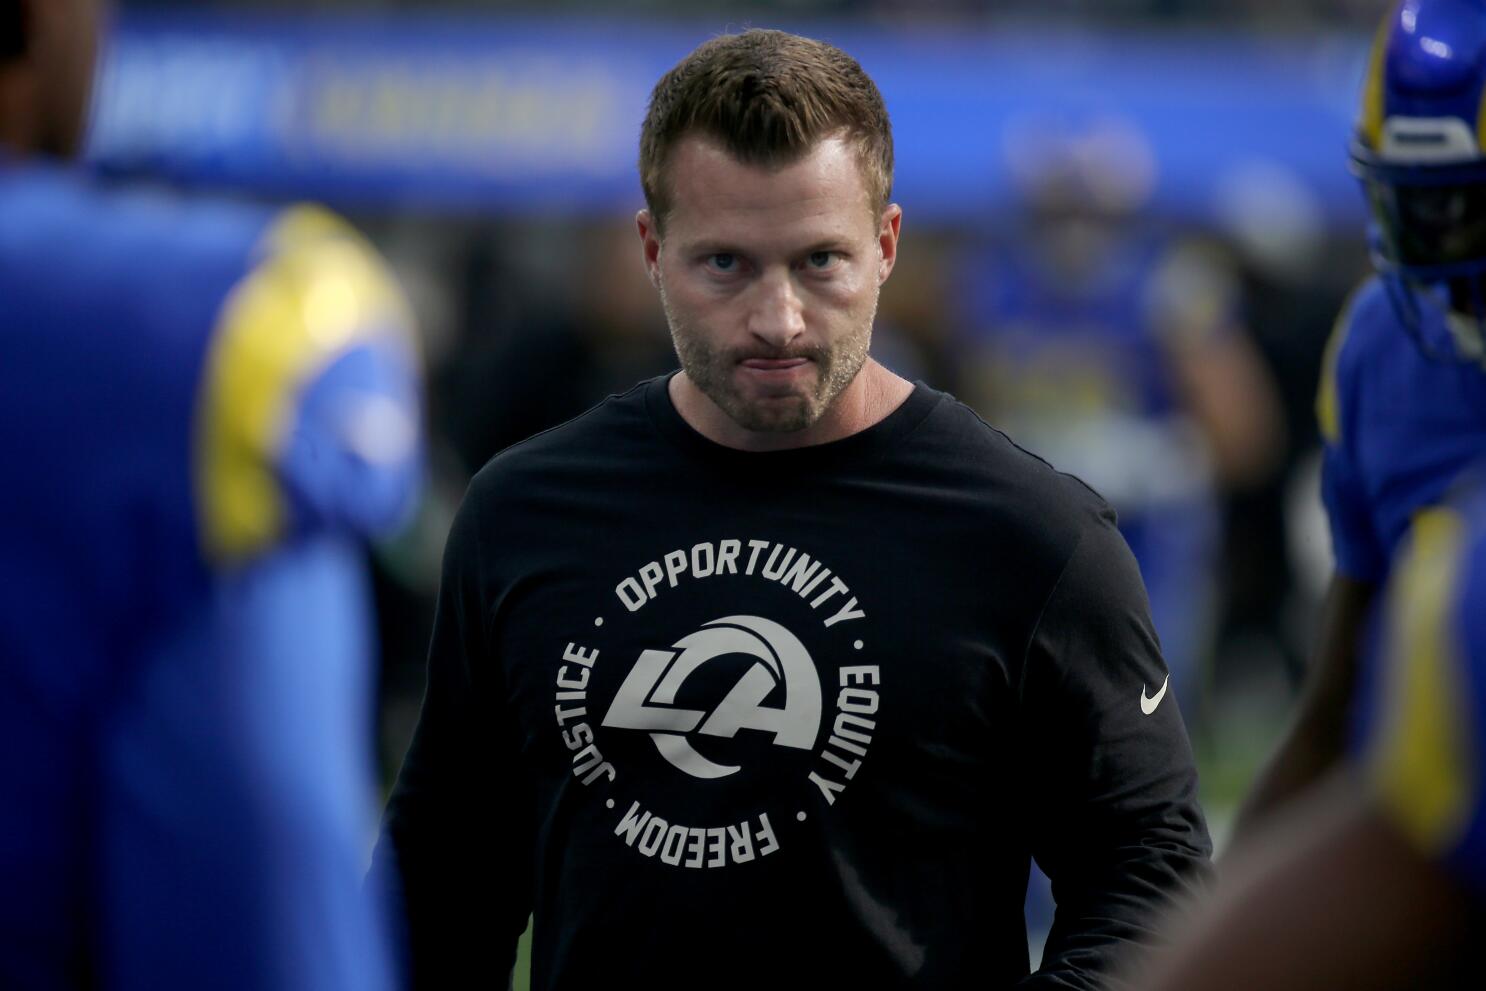 You won too fast too soon': NFL coaches on Sean McVay, burnout